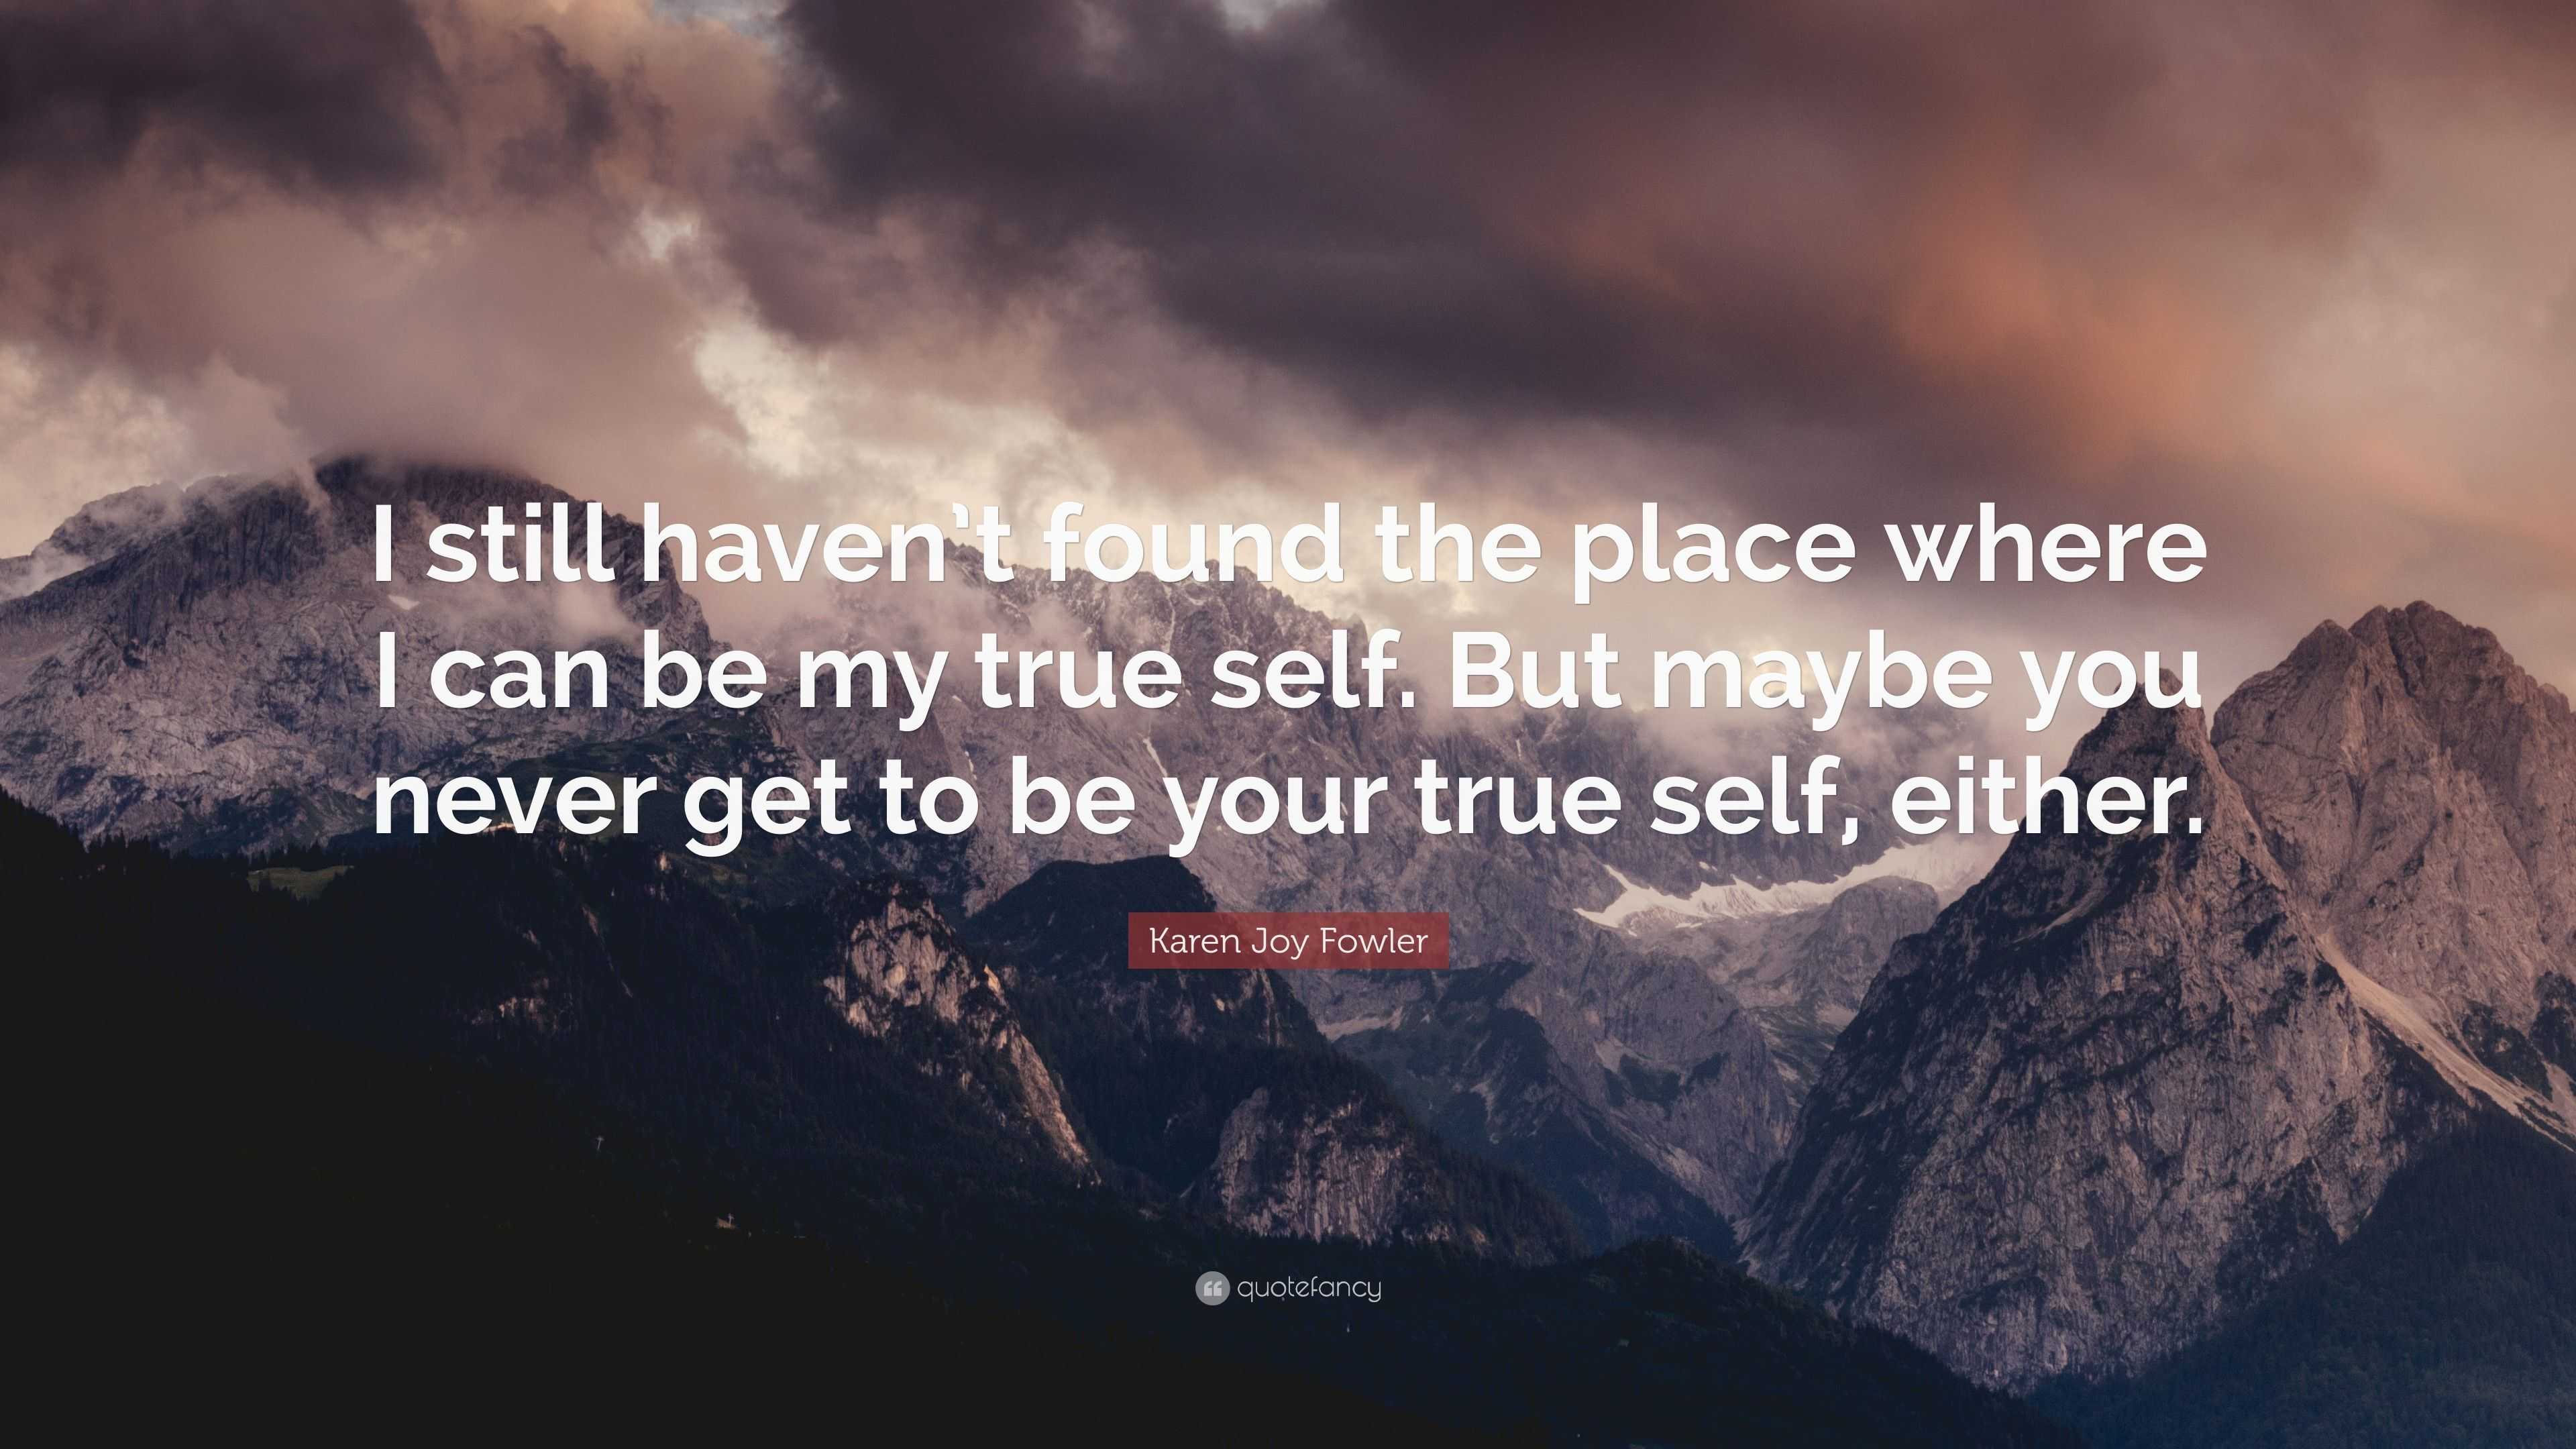 Karen Joy Fowler Quote: “I still haven’t found the place where I can be ...